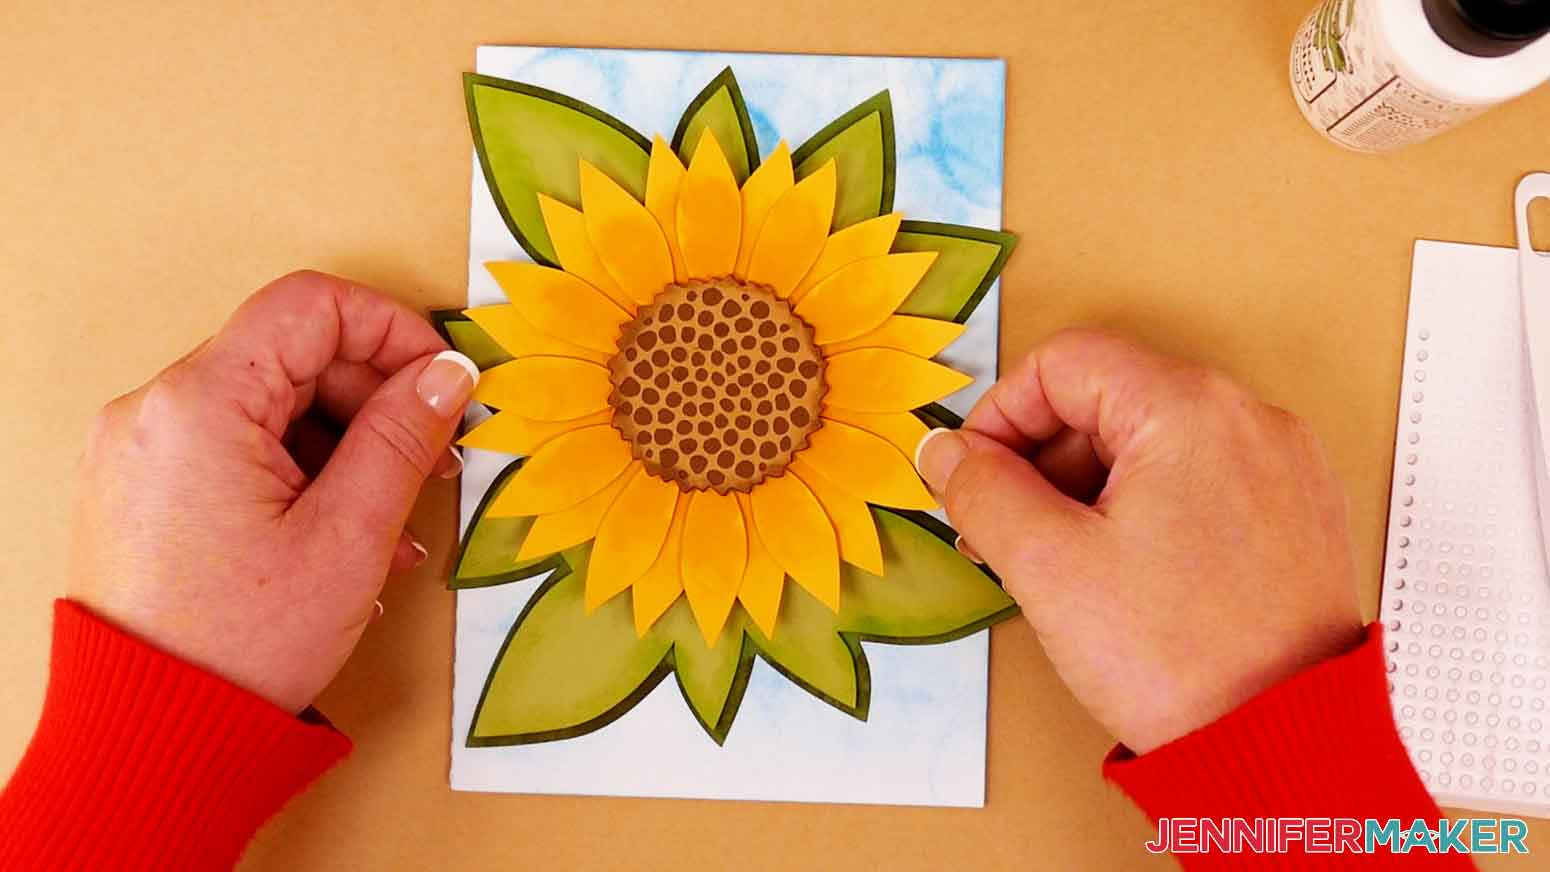 Apply craft glue to the back center of the sunflower and press the sunflower on to the leaf layers.